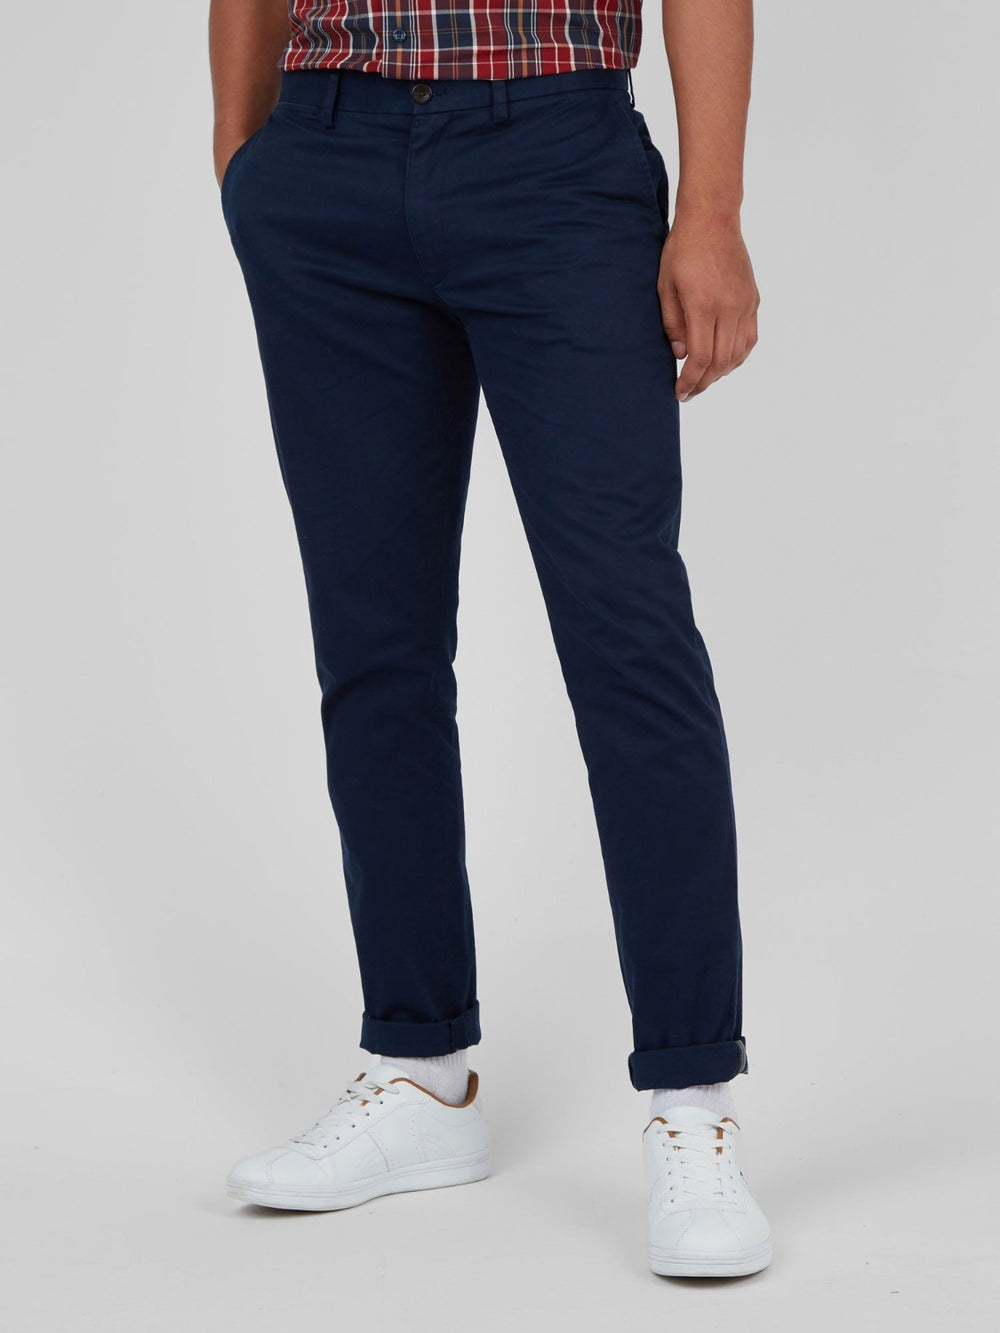 Perry Slim Fit Navy Blue Striped Pants – MenSuitsPage